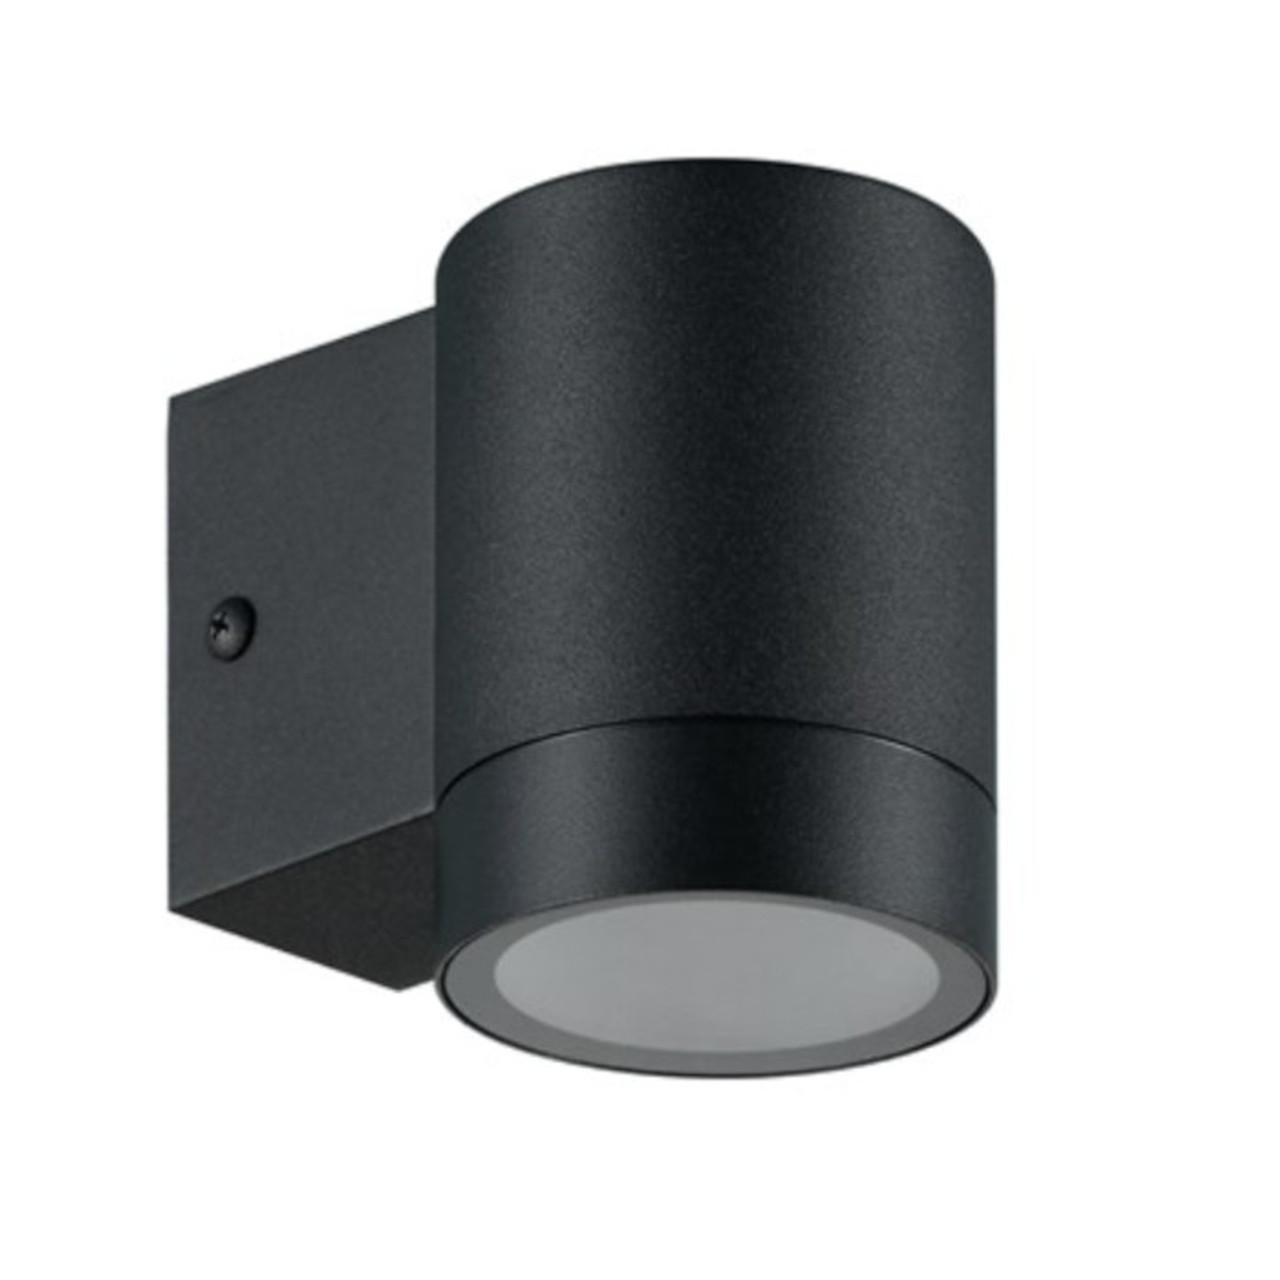 LED SylDeco Direct GU10 Wall Light IP54 Black (Lamp is not included)